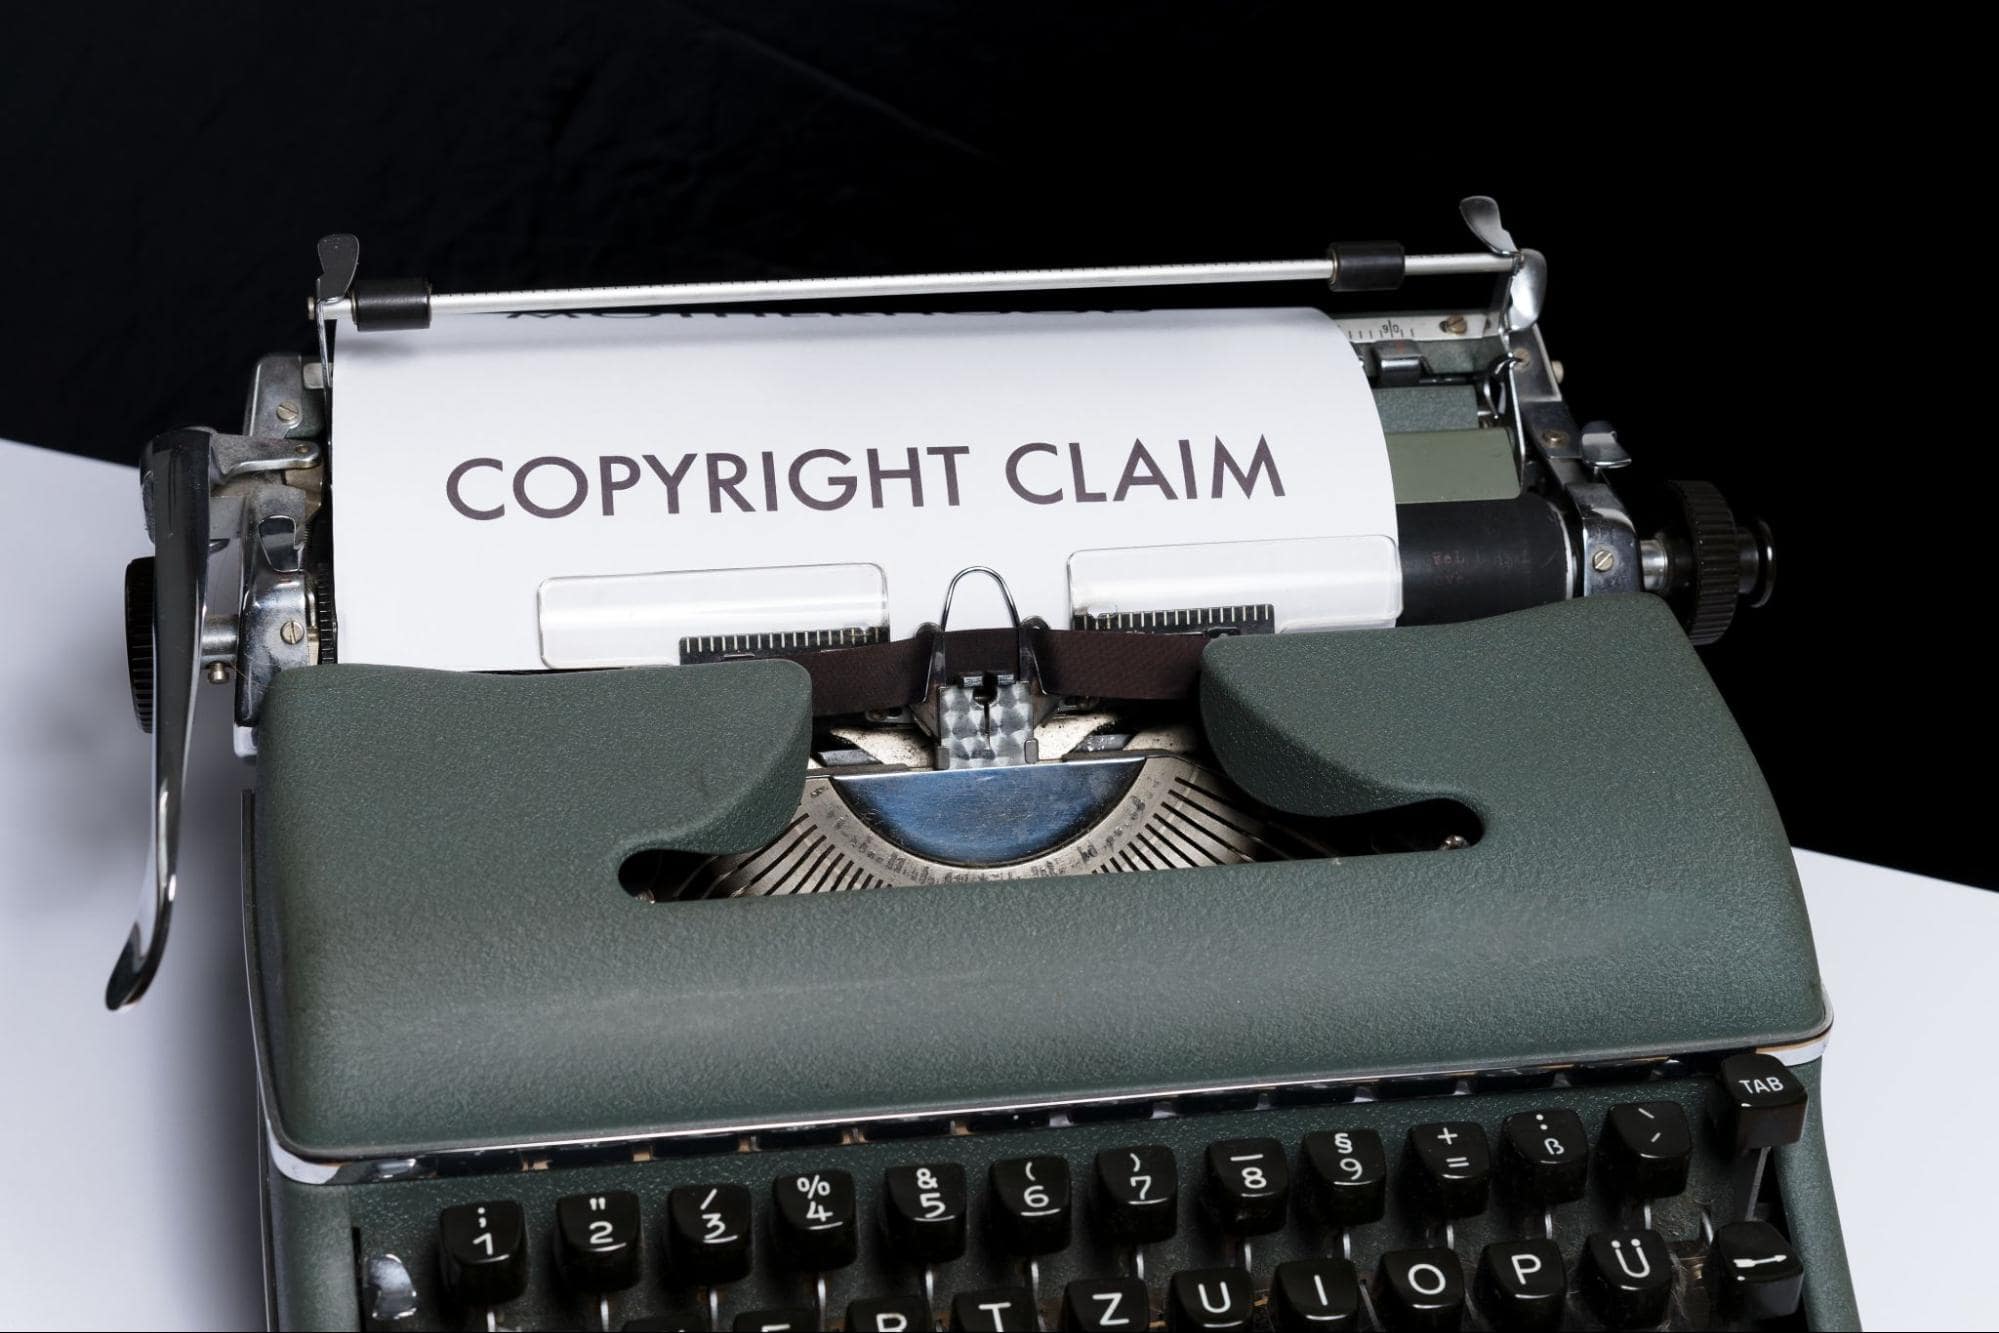 Typewriter with paper that says "Copyright claim"